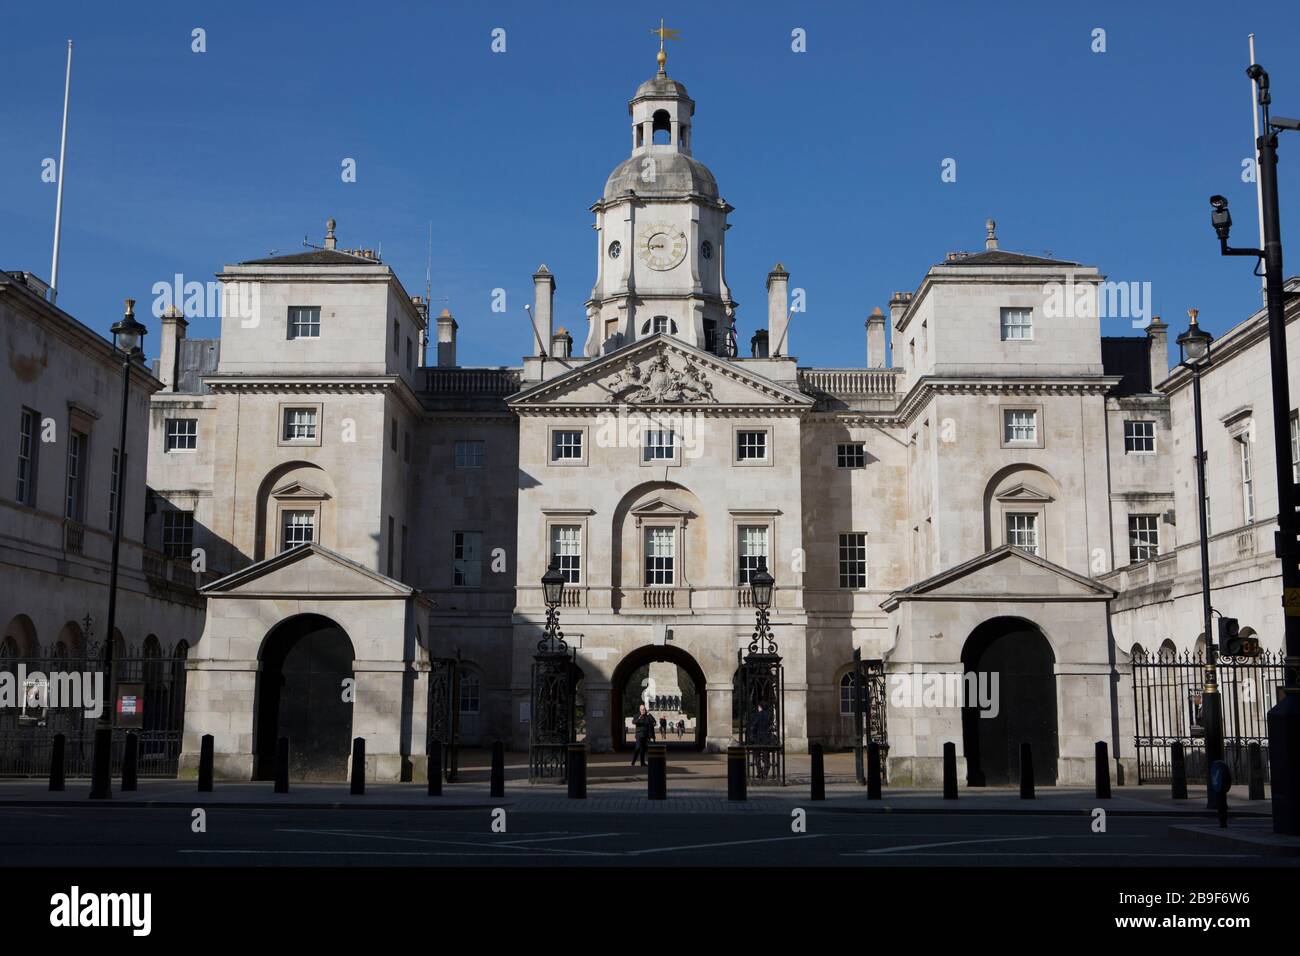 London, UK. 24th Mar, 2020. In an attempt to slow the spread of Coronavirus, Prime Minister Boris Johnson orders the UK to 'stay home' leaving usually busy roads and streets in London empty. Credit: Marcin Nowak/Alamy Live News Stock Photo